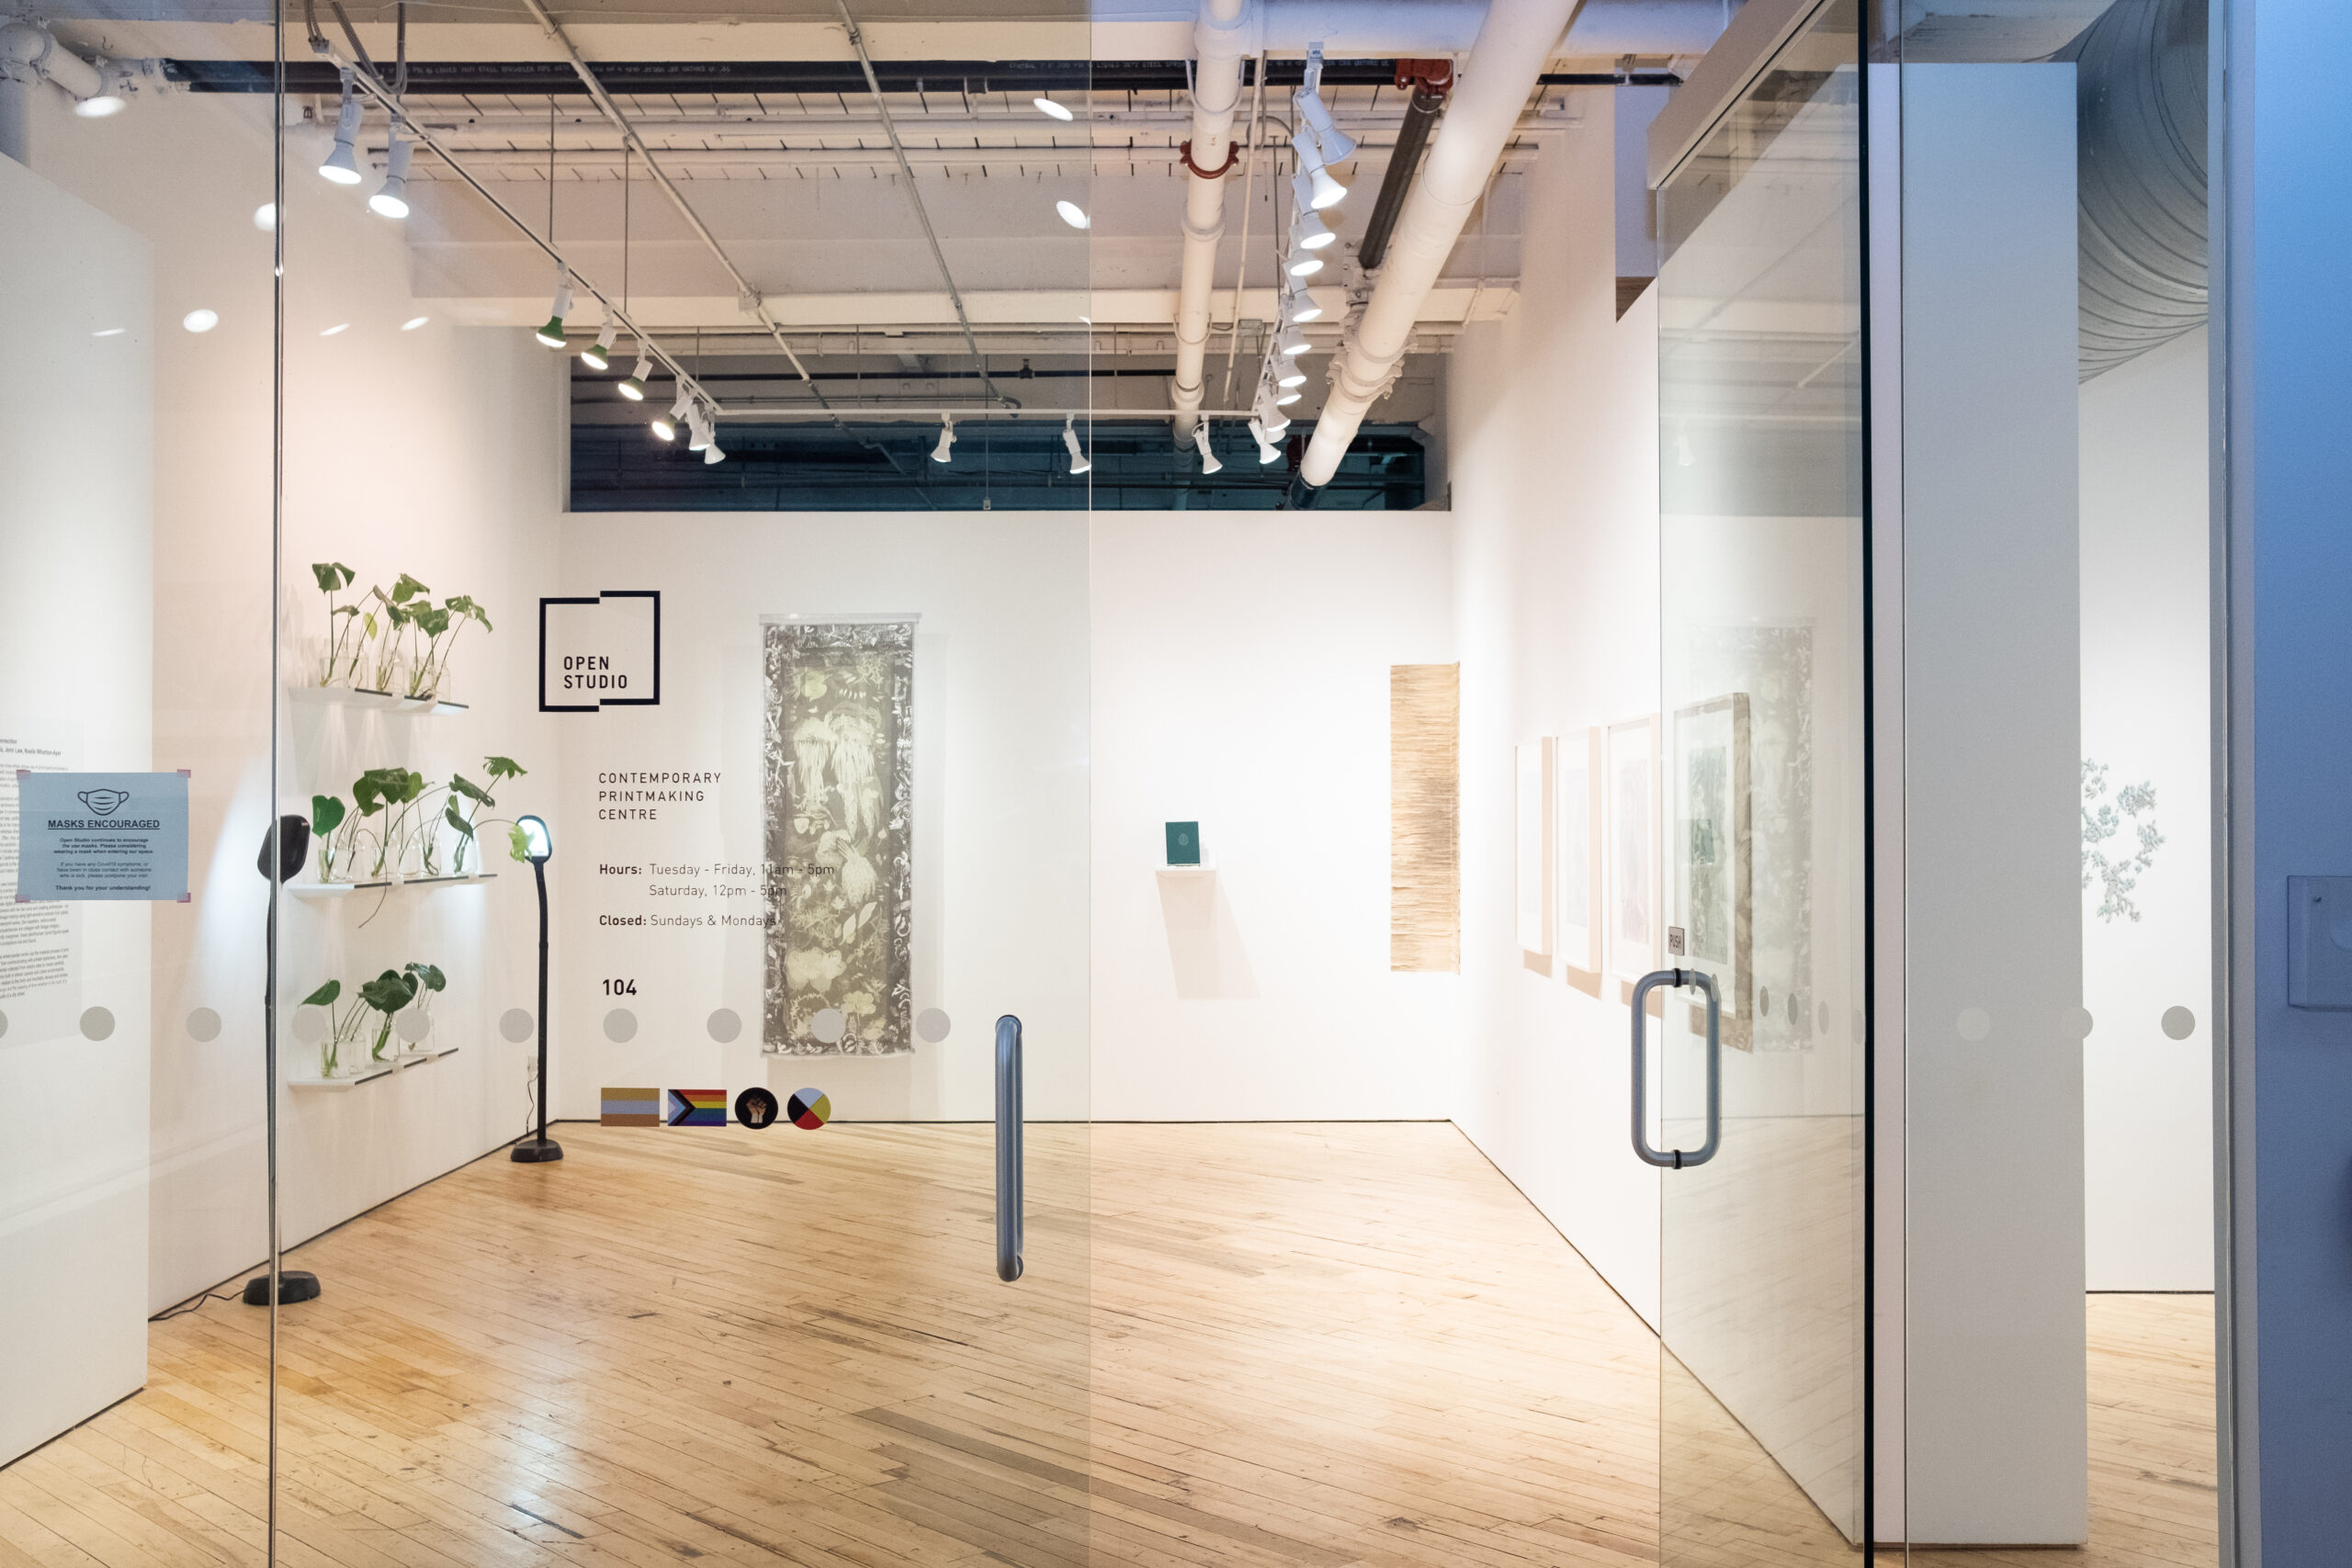 Image: Installation view of group exhibit Cultivating Connection at Open Studio, featuring artwork by Alyssa Alikpala, Noelle Wharton-Ayer, and Jenn Law